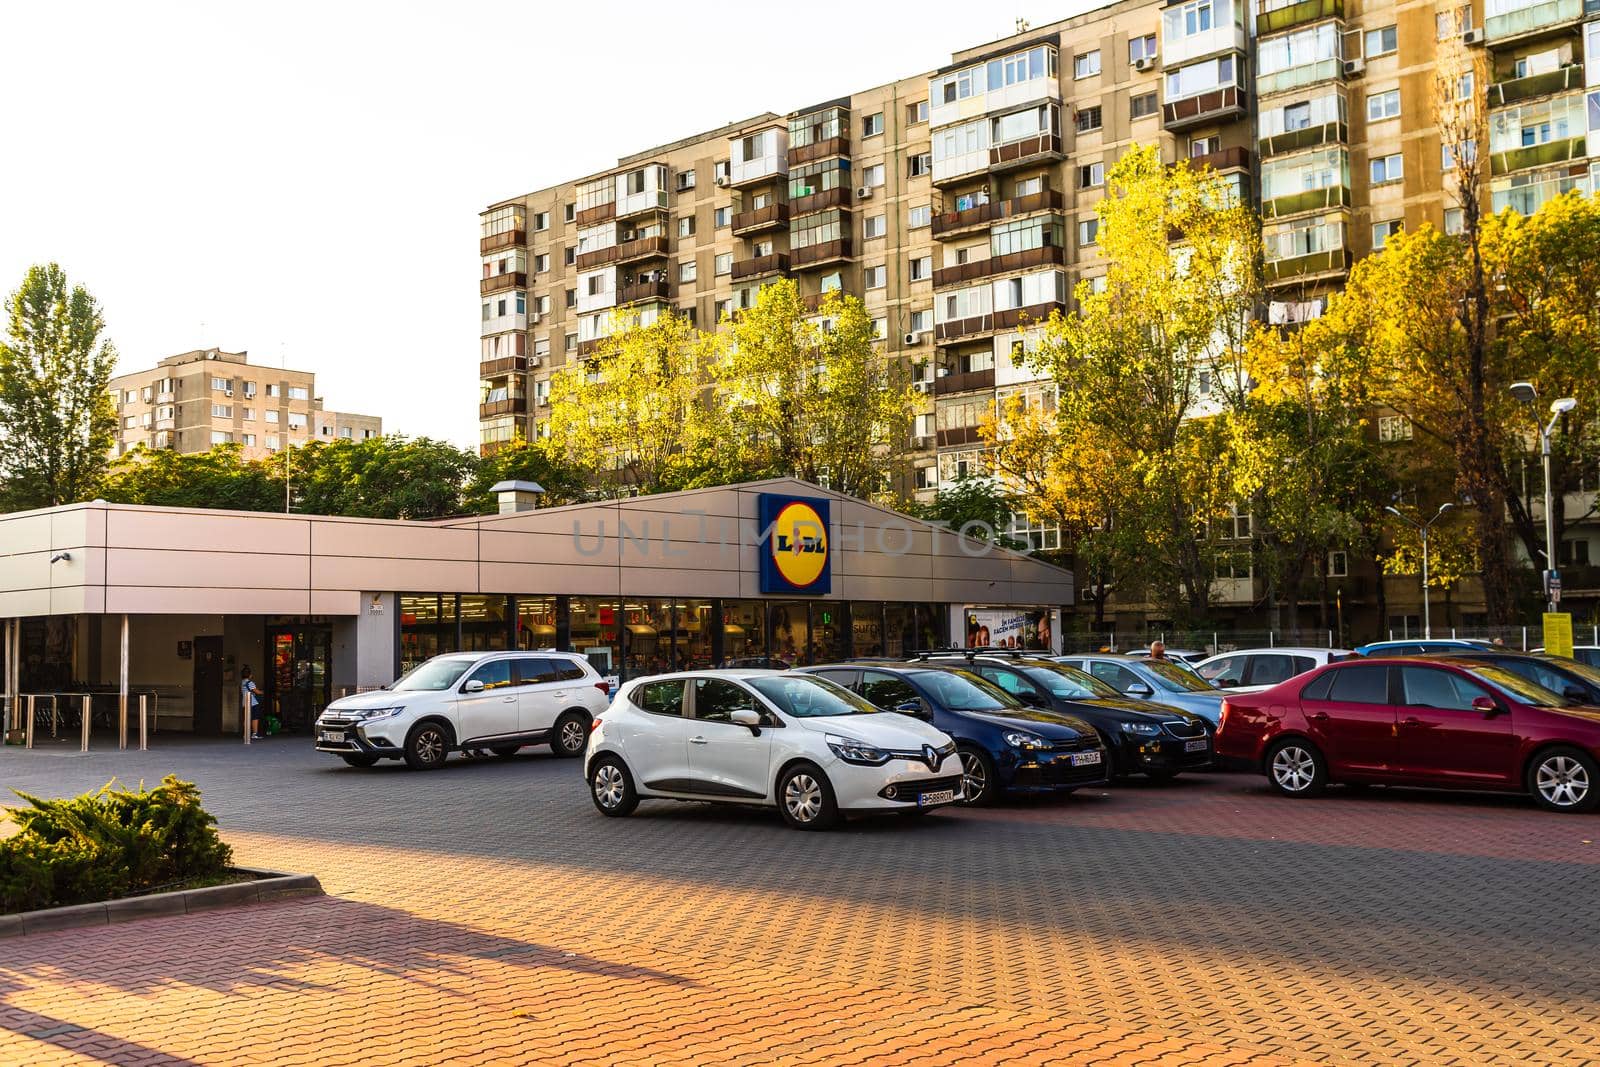 LIDL supermarket and logo. Lidl store in Bucharest, Romania, 2021